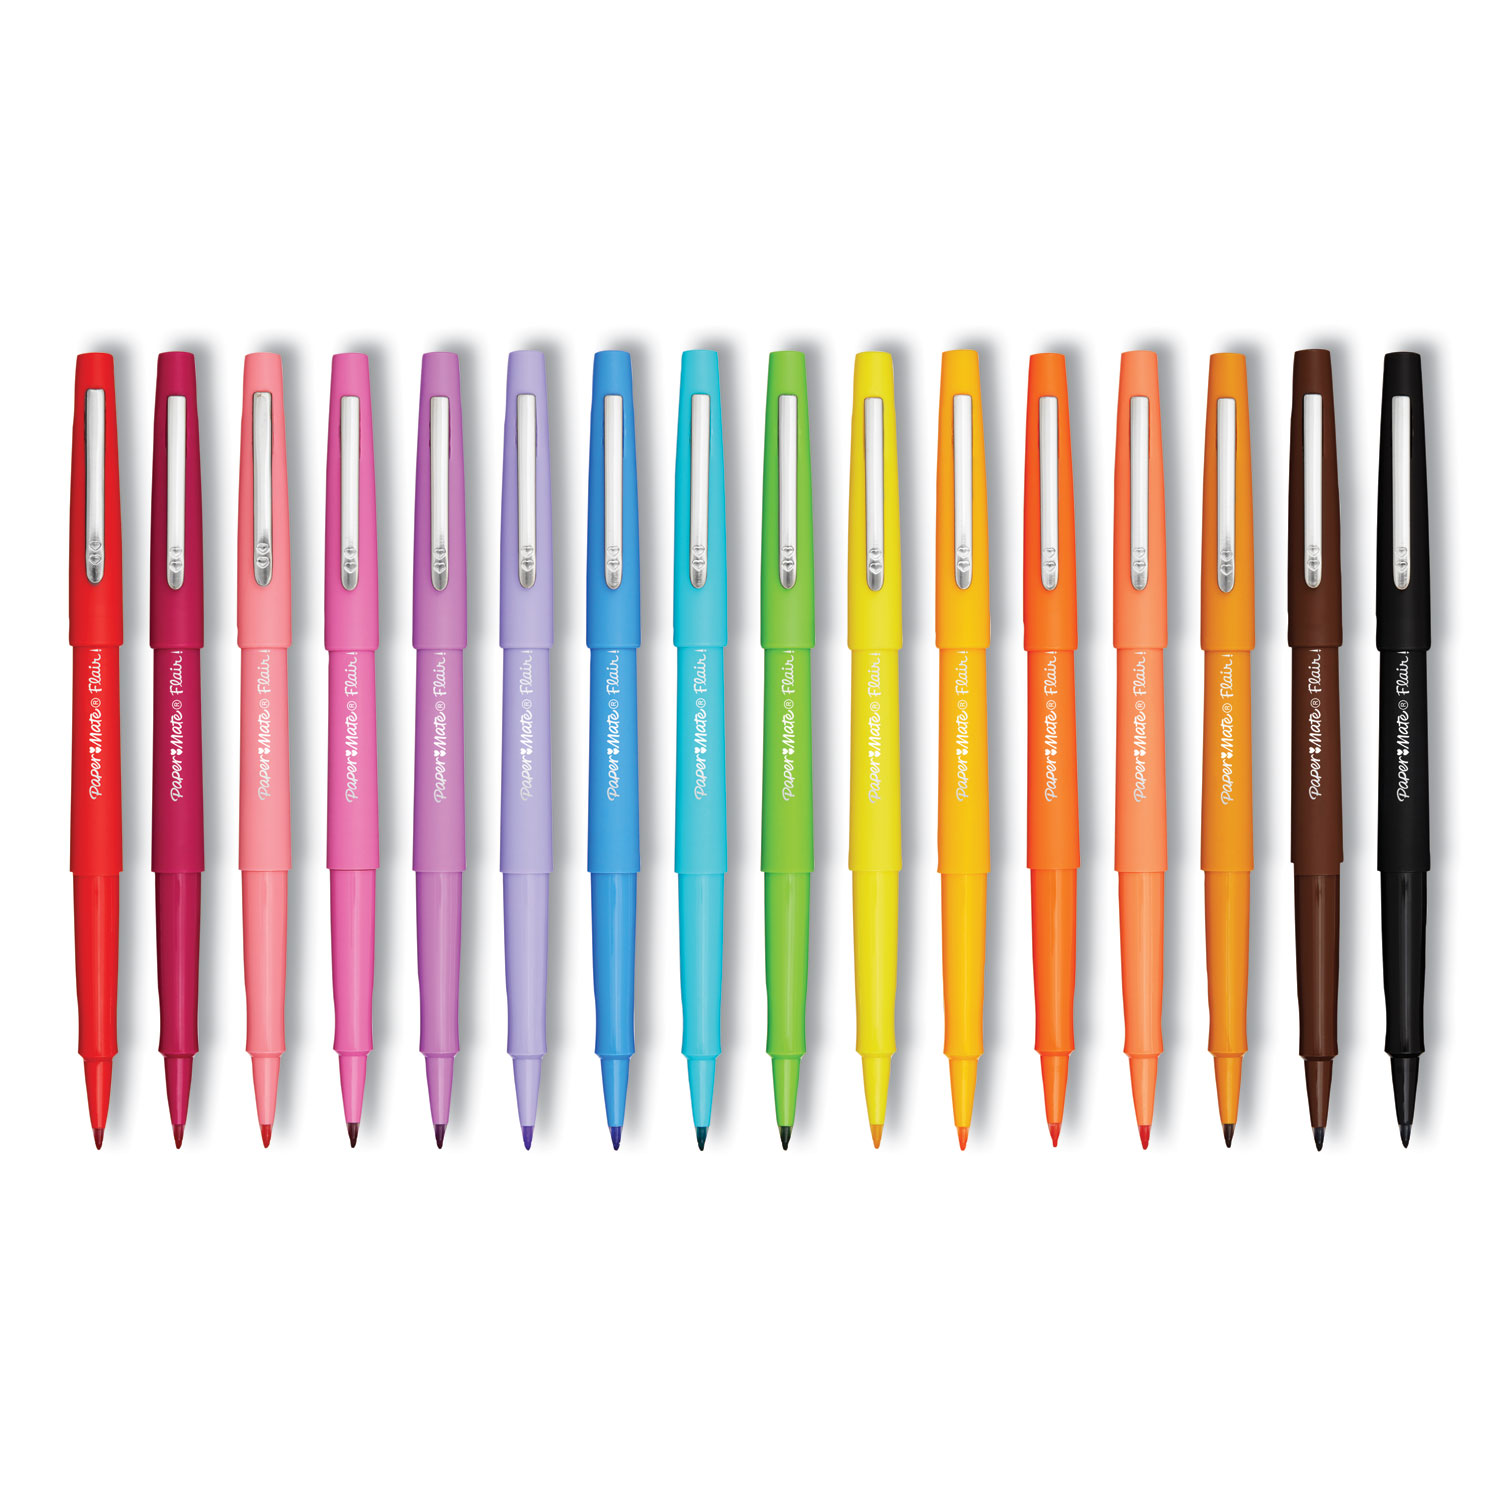 0.7mm Paper Mate Flair 1 Set of 16 Count Scented Felt Tip Pens Assorted Sunday Brunch Scents and Colors 